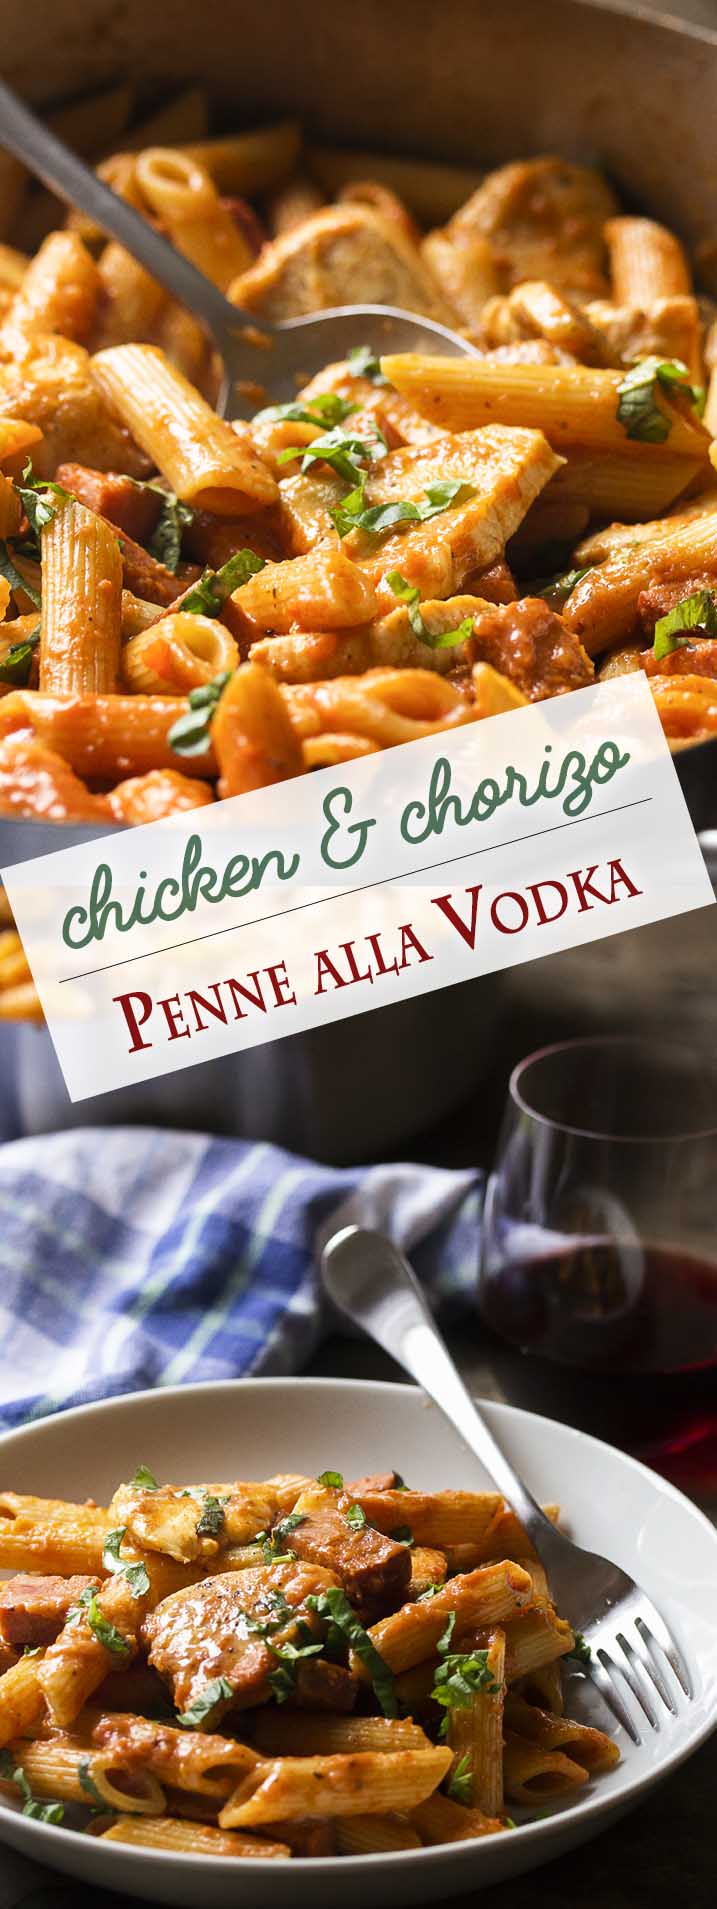 My penne alla vodka is creamy and full of deep tomato flavor from homemade marinara along with plenty of seared chicken and chorizo sausage. Easy weeknight meal! | justalittlebitofbacon.com